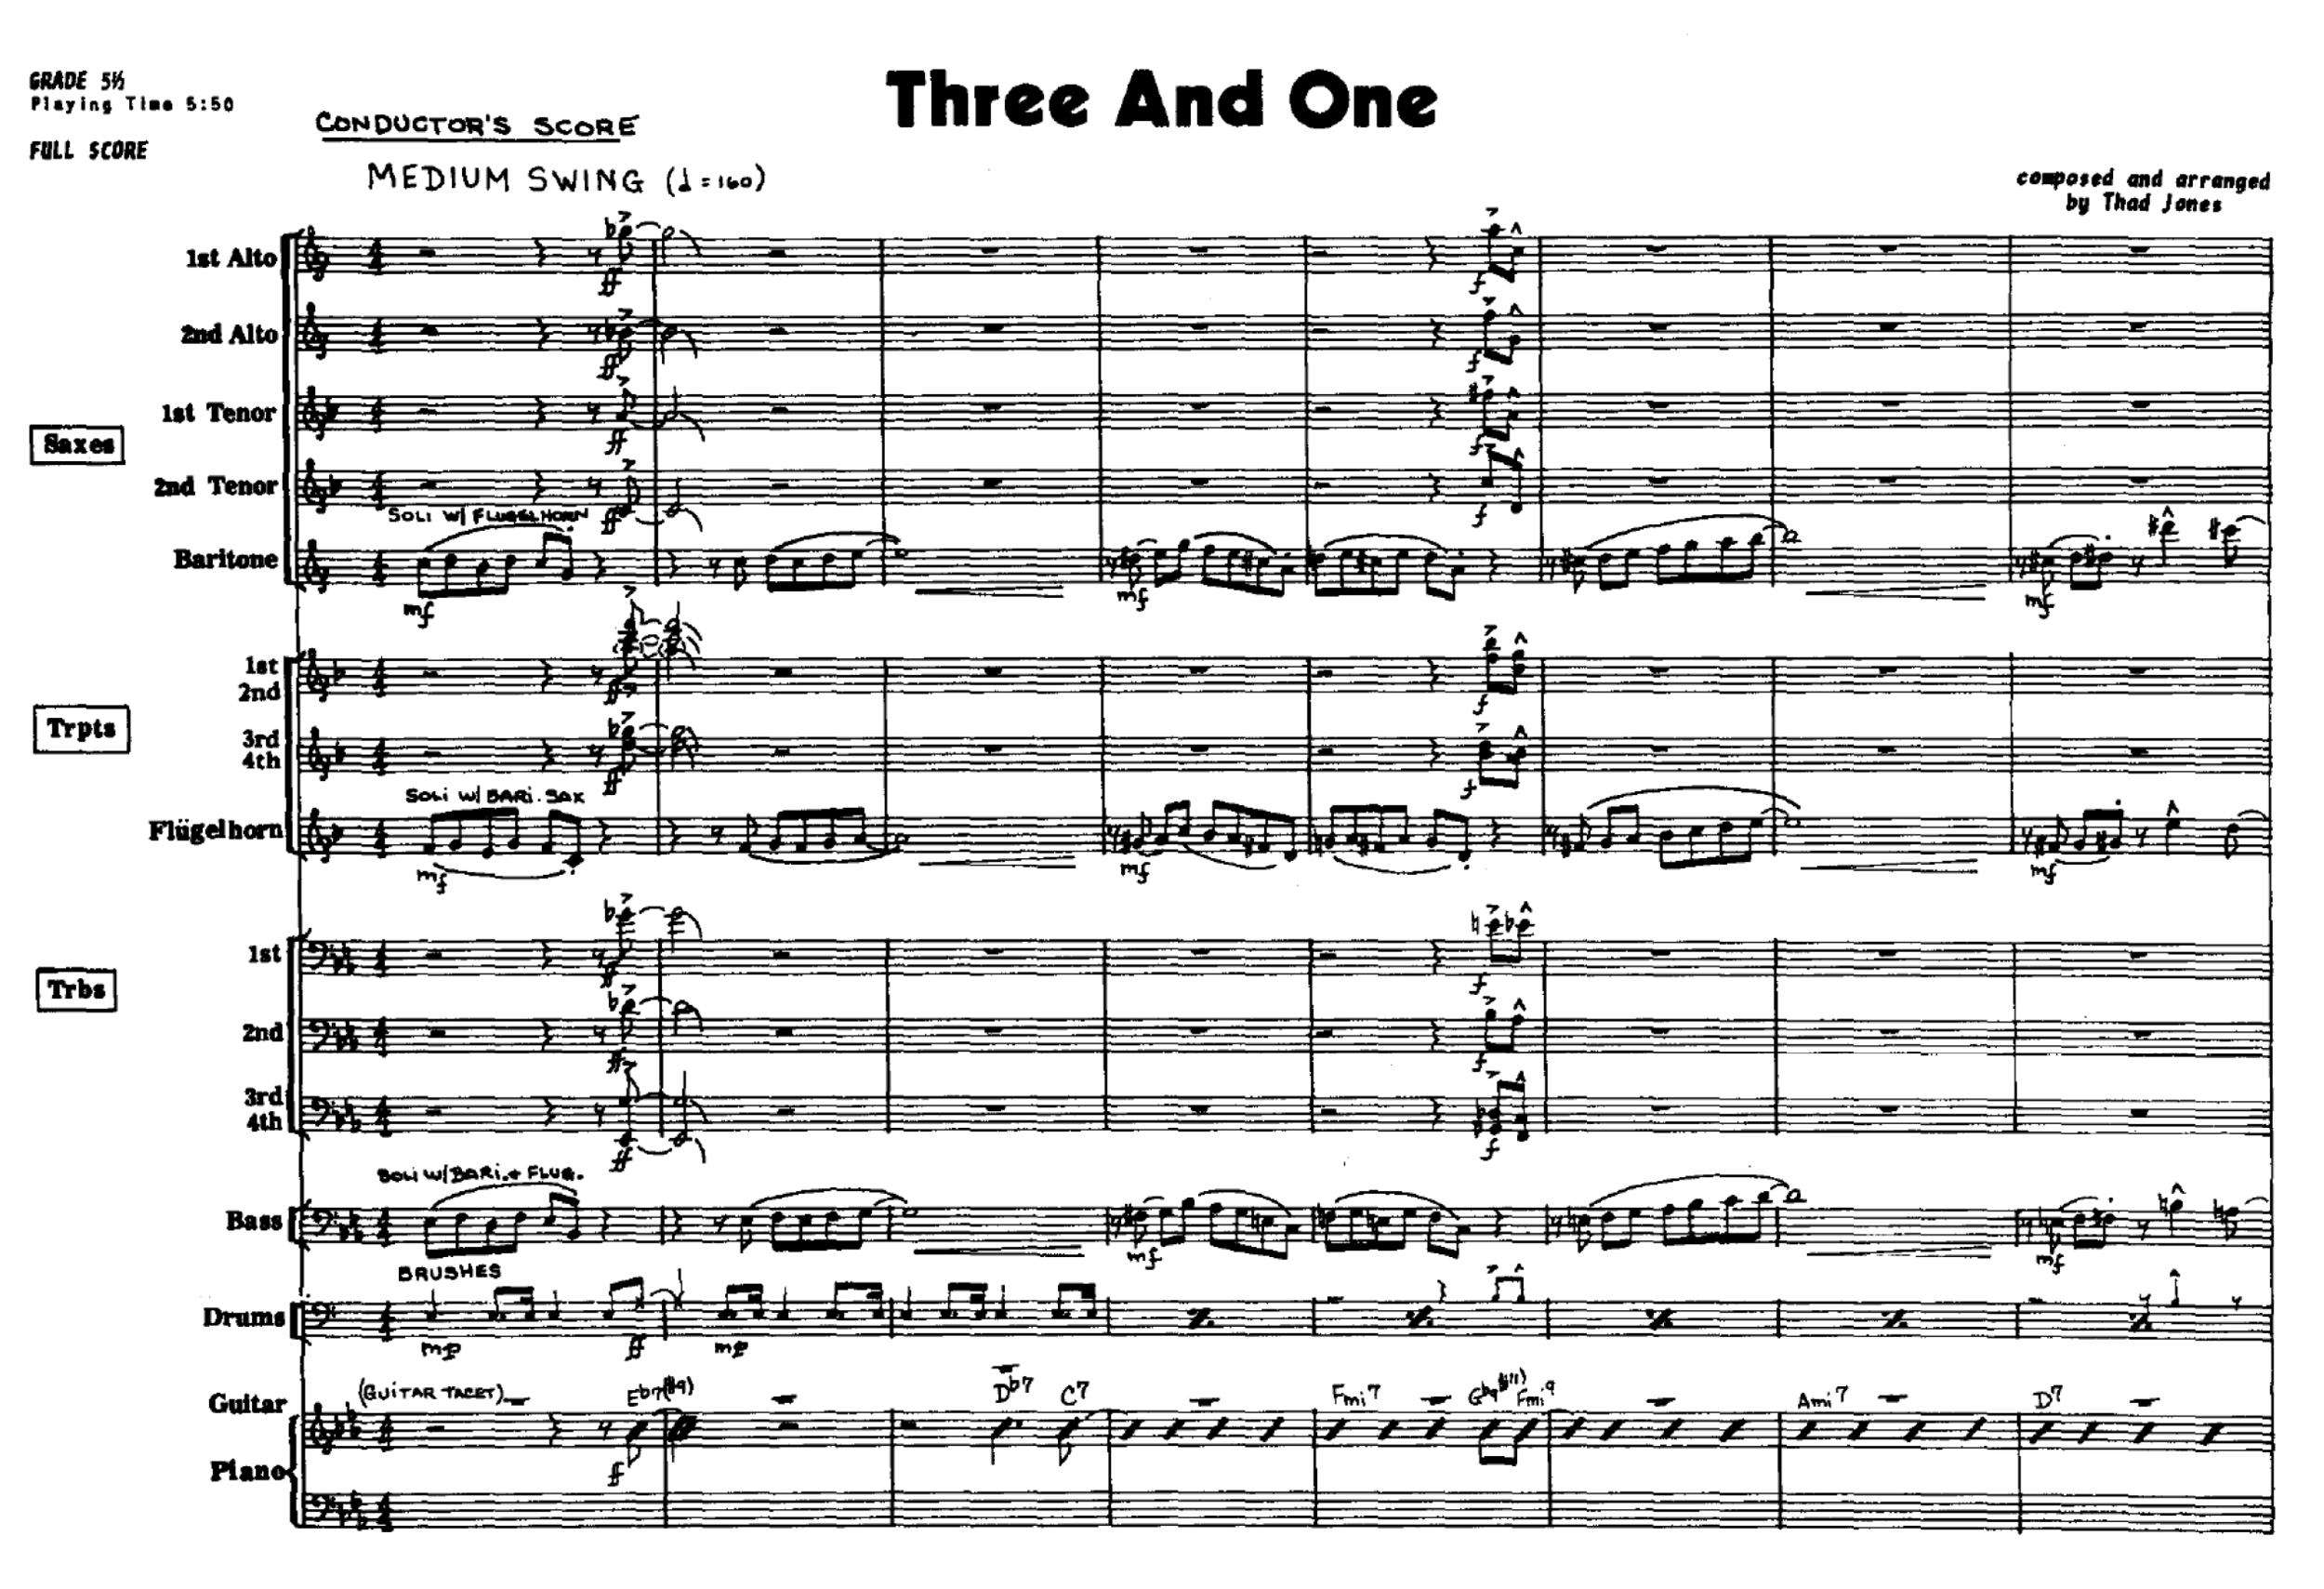 The Orchestra: A User's Manual - Score Layouts - Brass